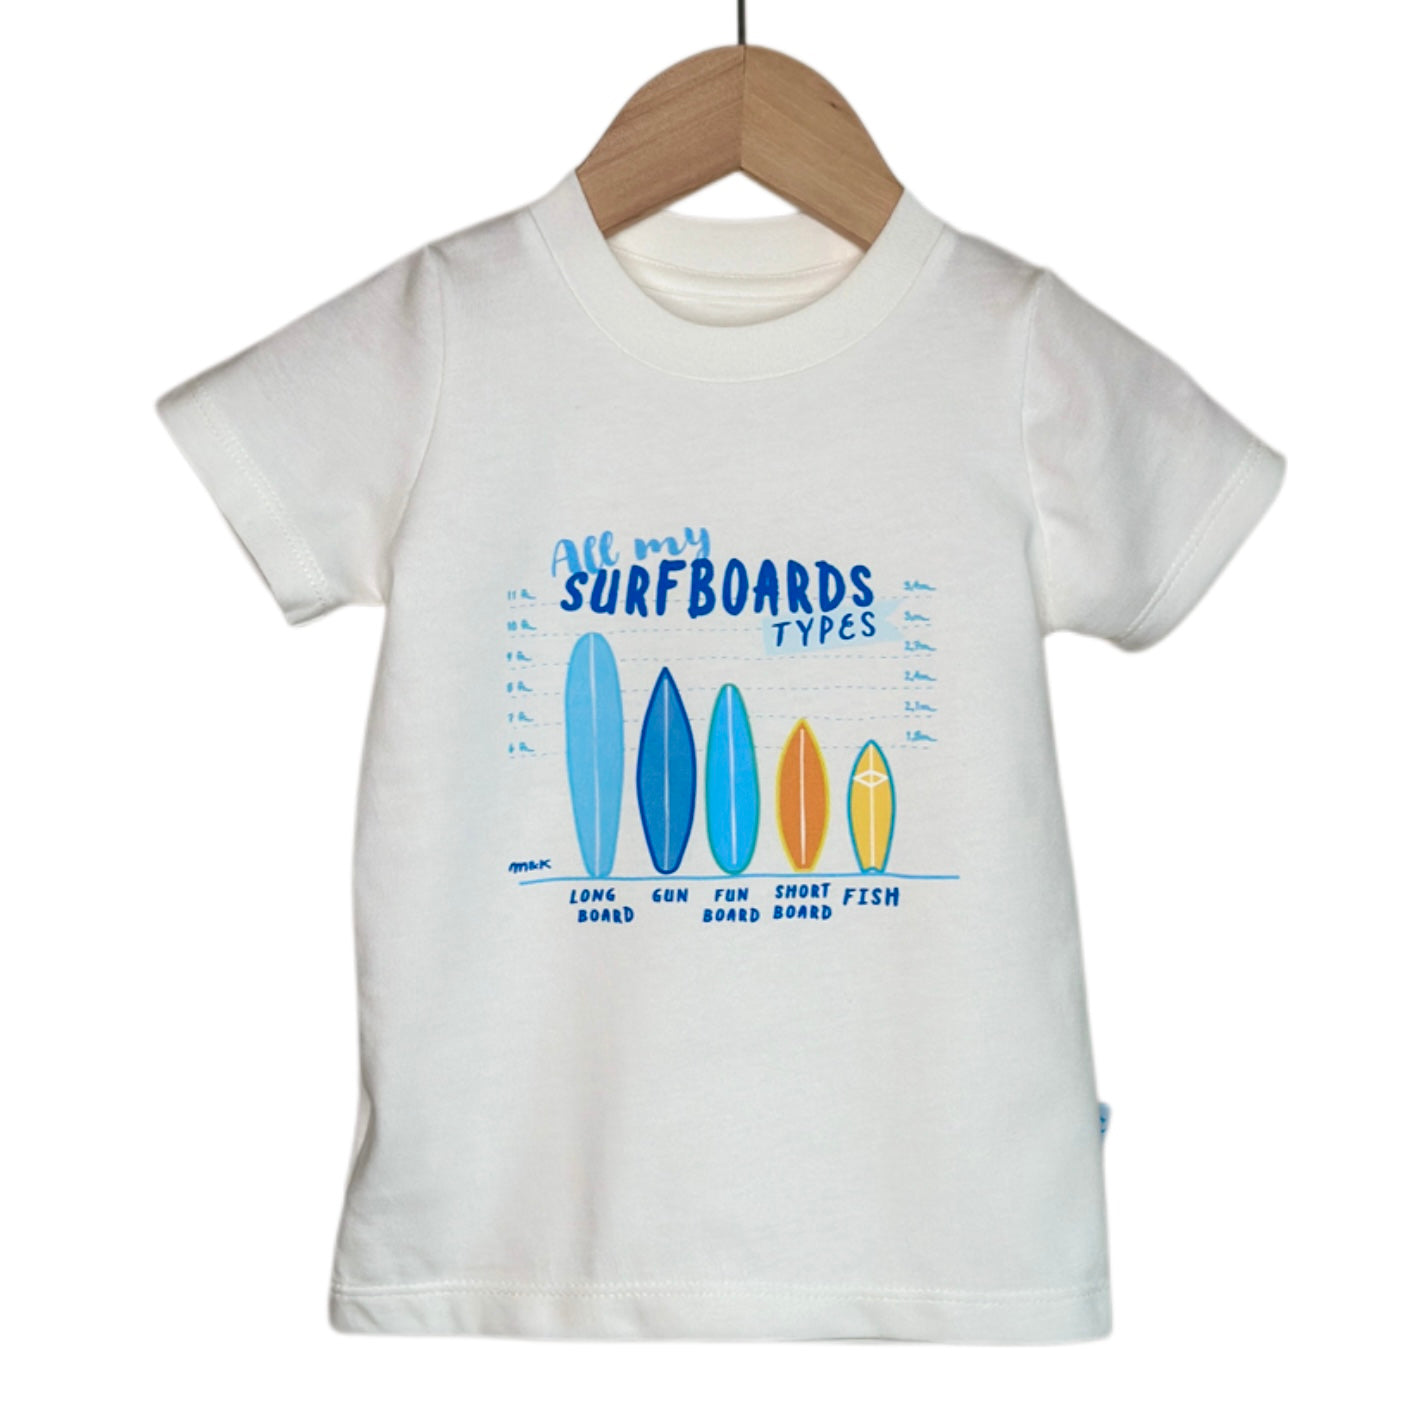 SURFBOARDS TYPES GRAPHIC T-SHIRT